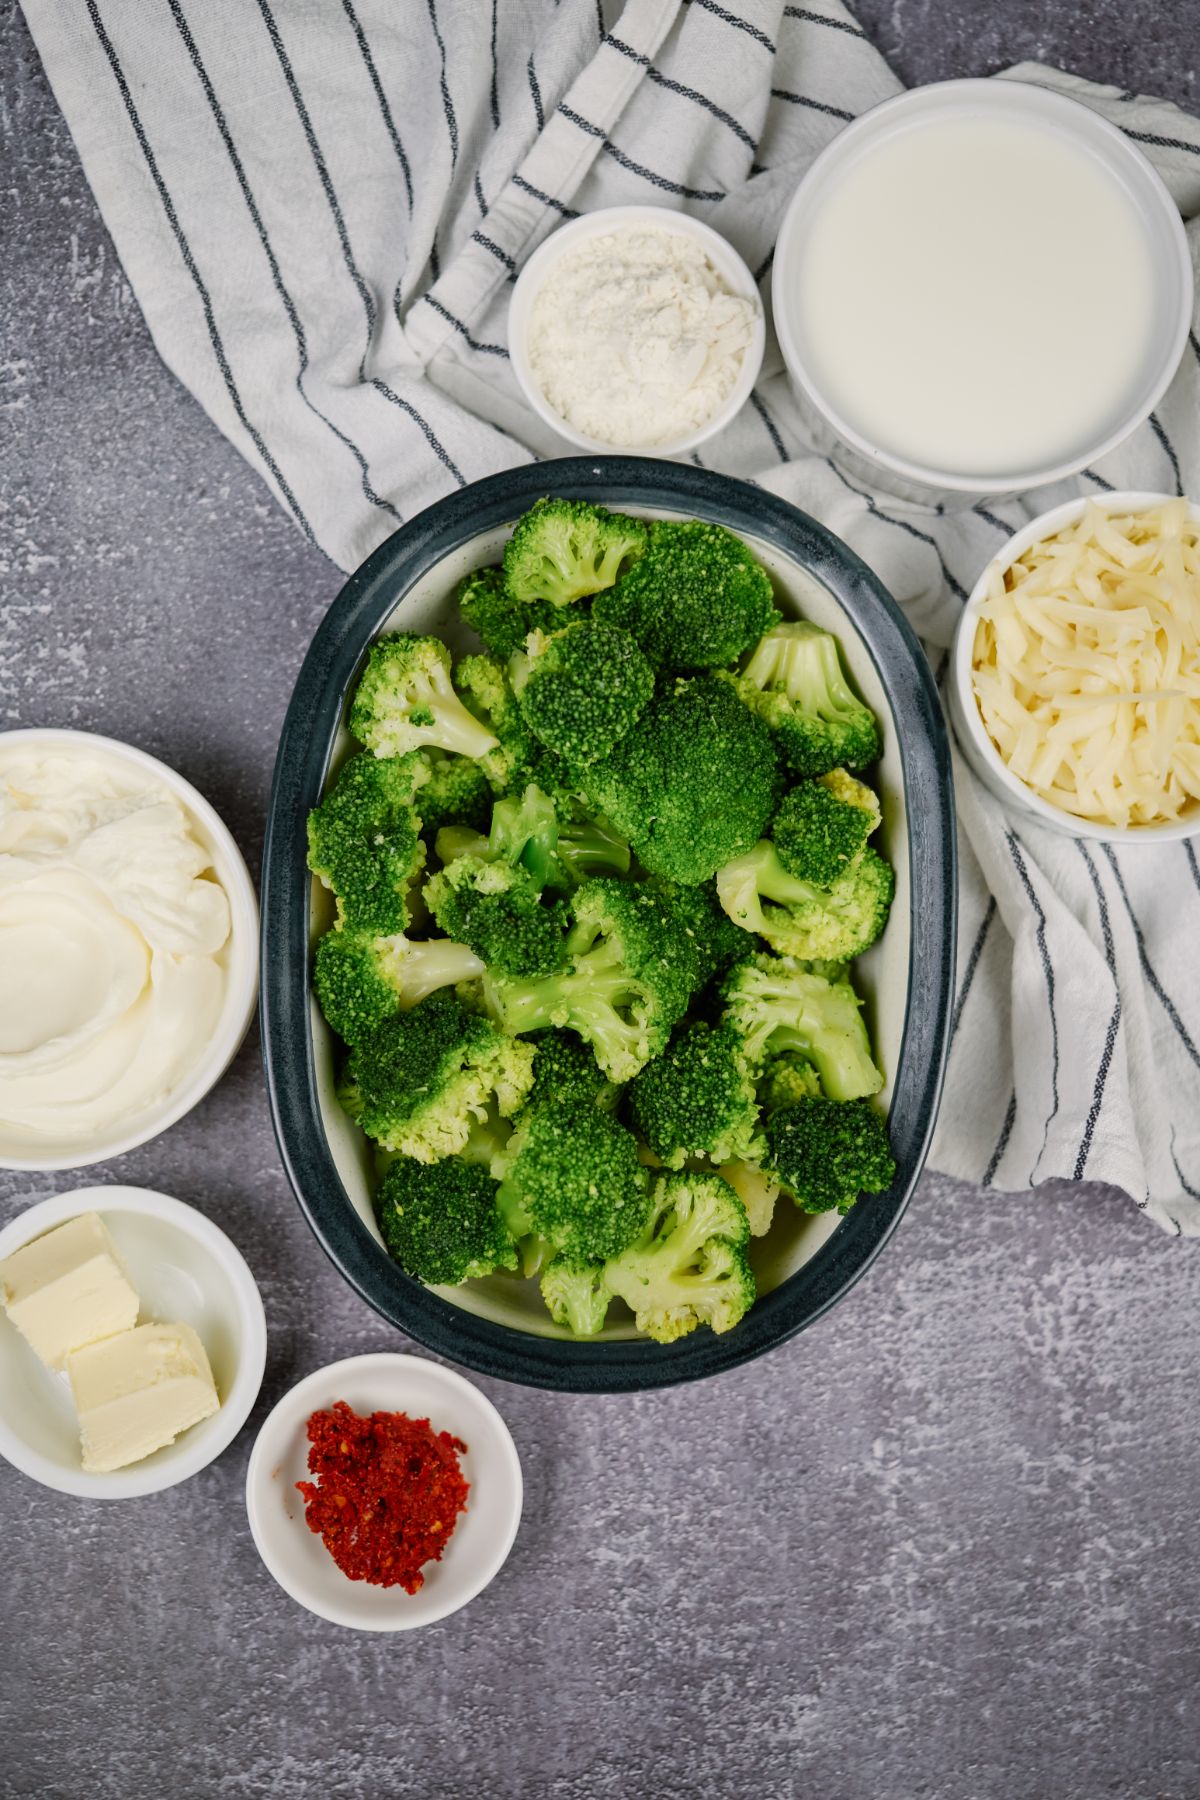 large bowl of fresh broccoli next to small white bowls of butter and cheese on gray table